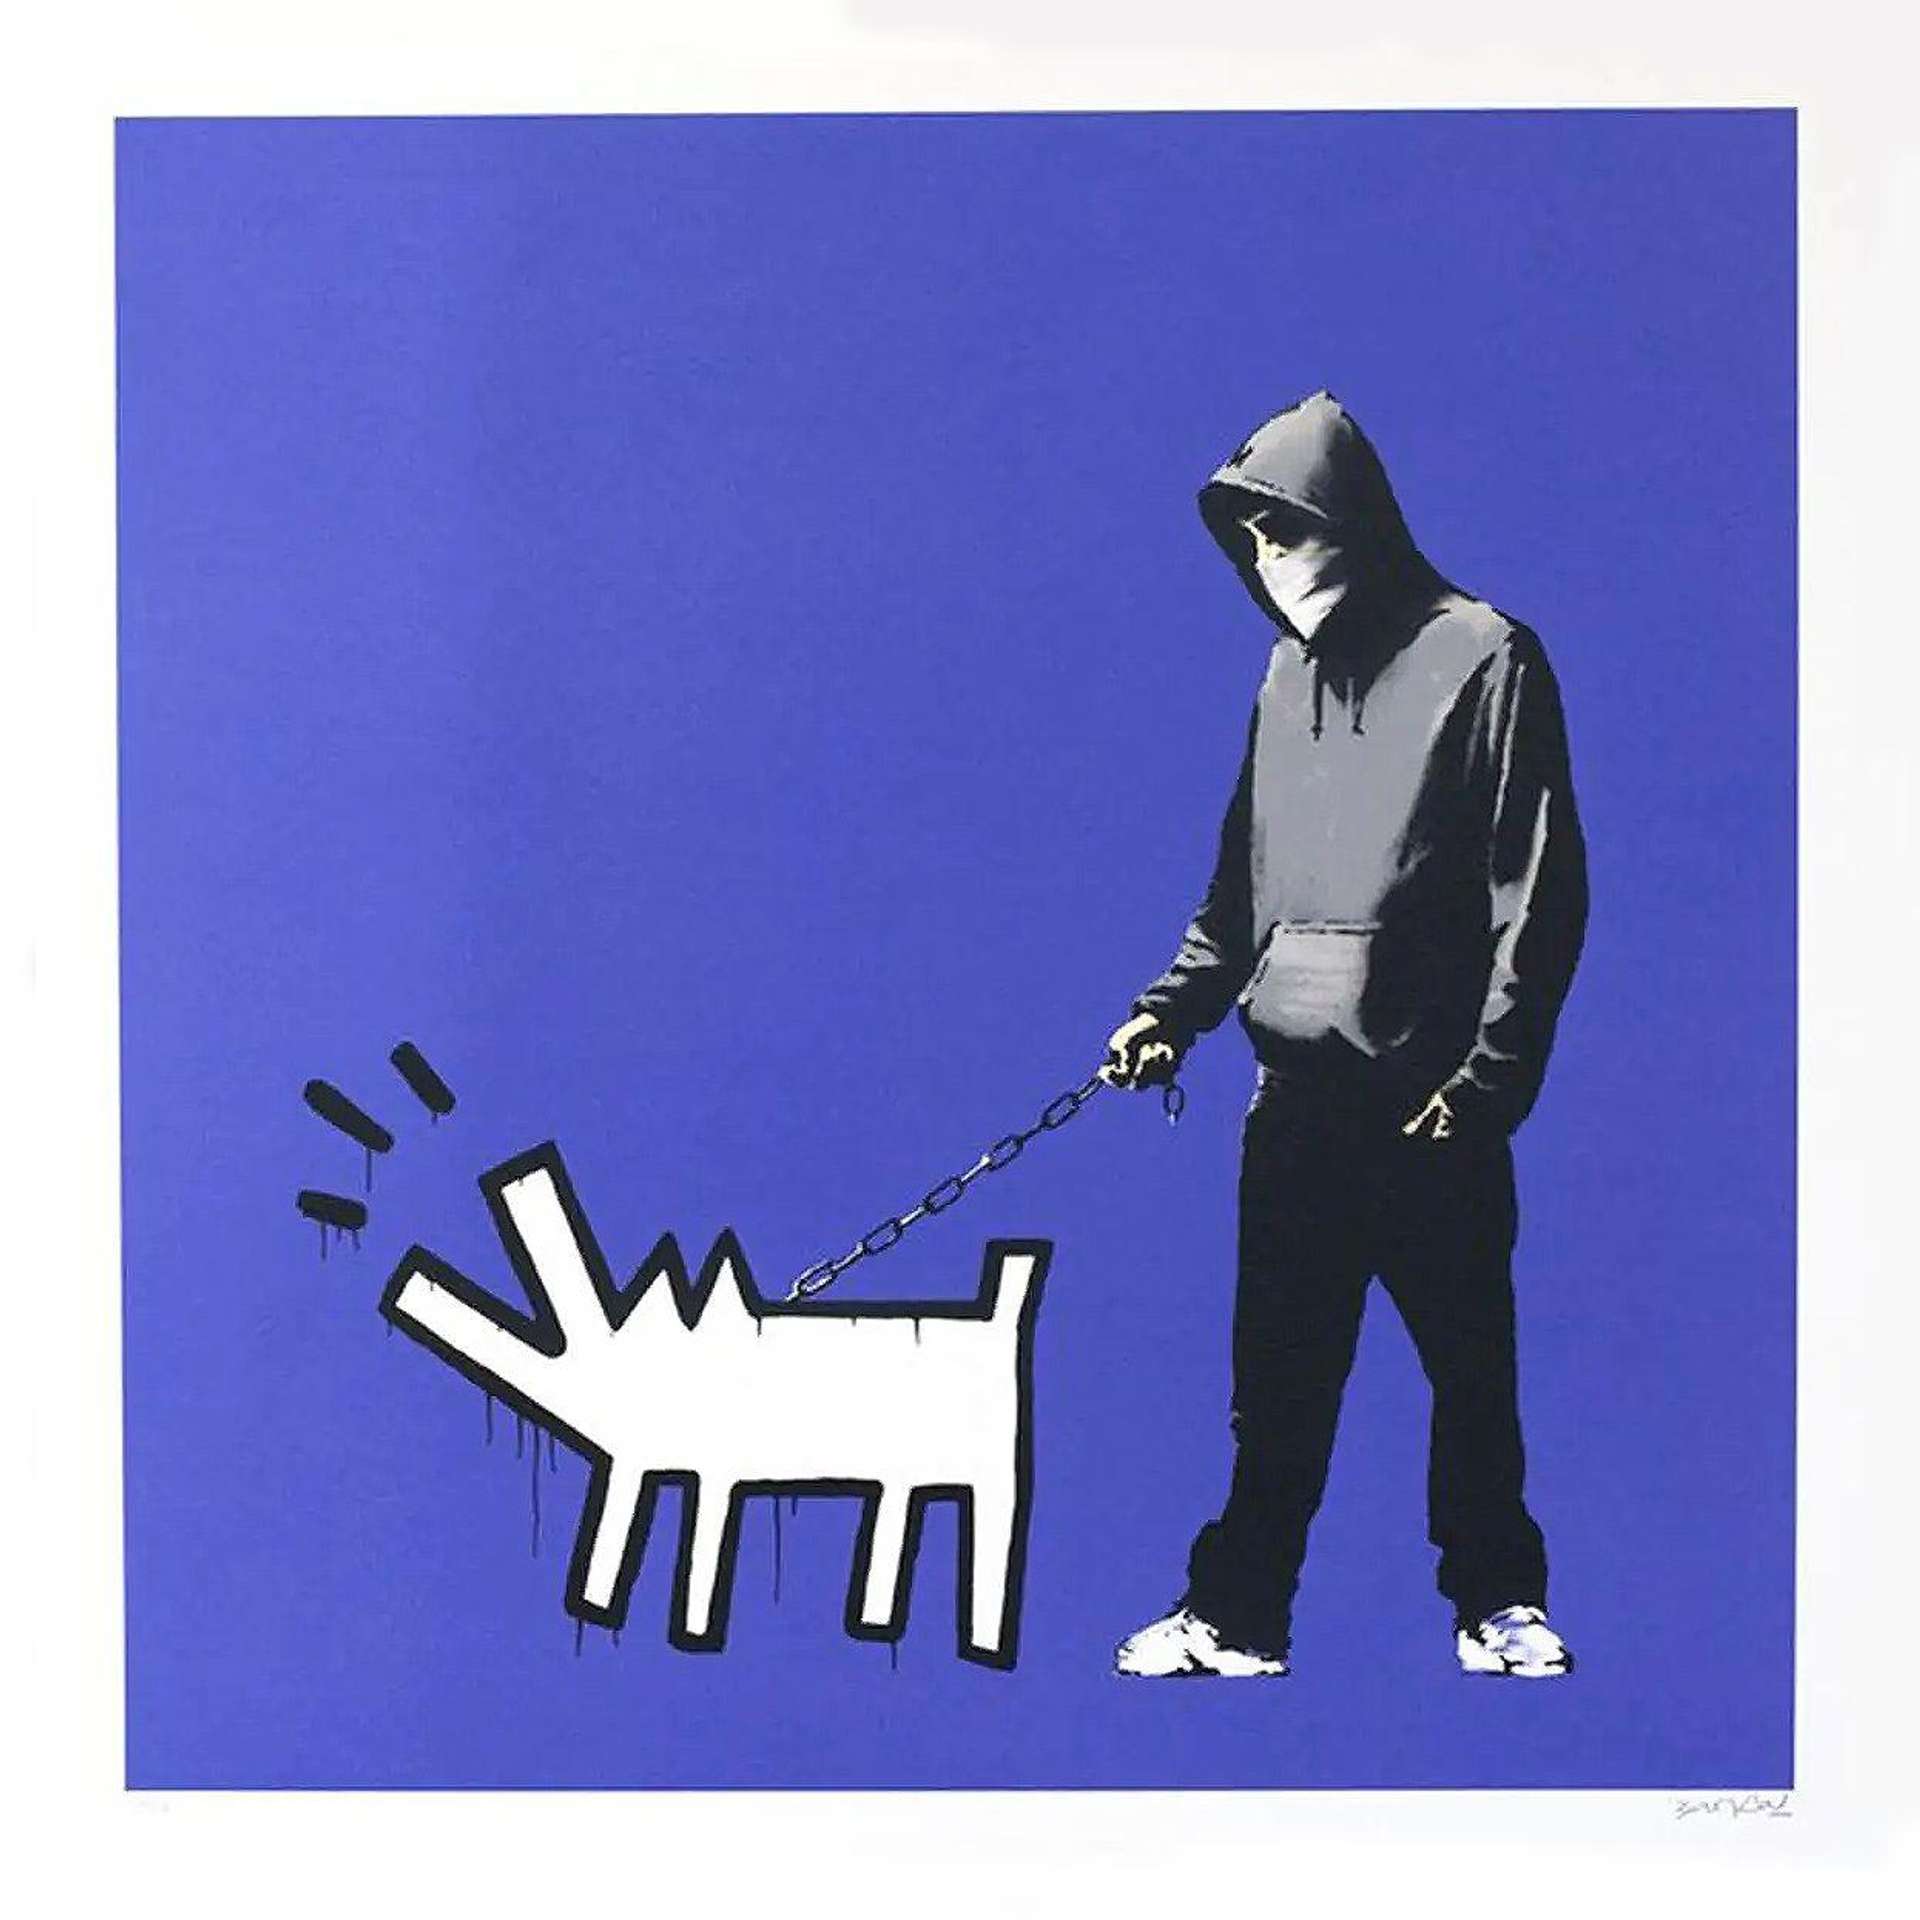 A screenprint by Banksy depicting a hooded man holding the leash of a Keith Haring Barking Dog, set against a dark blue background.